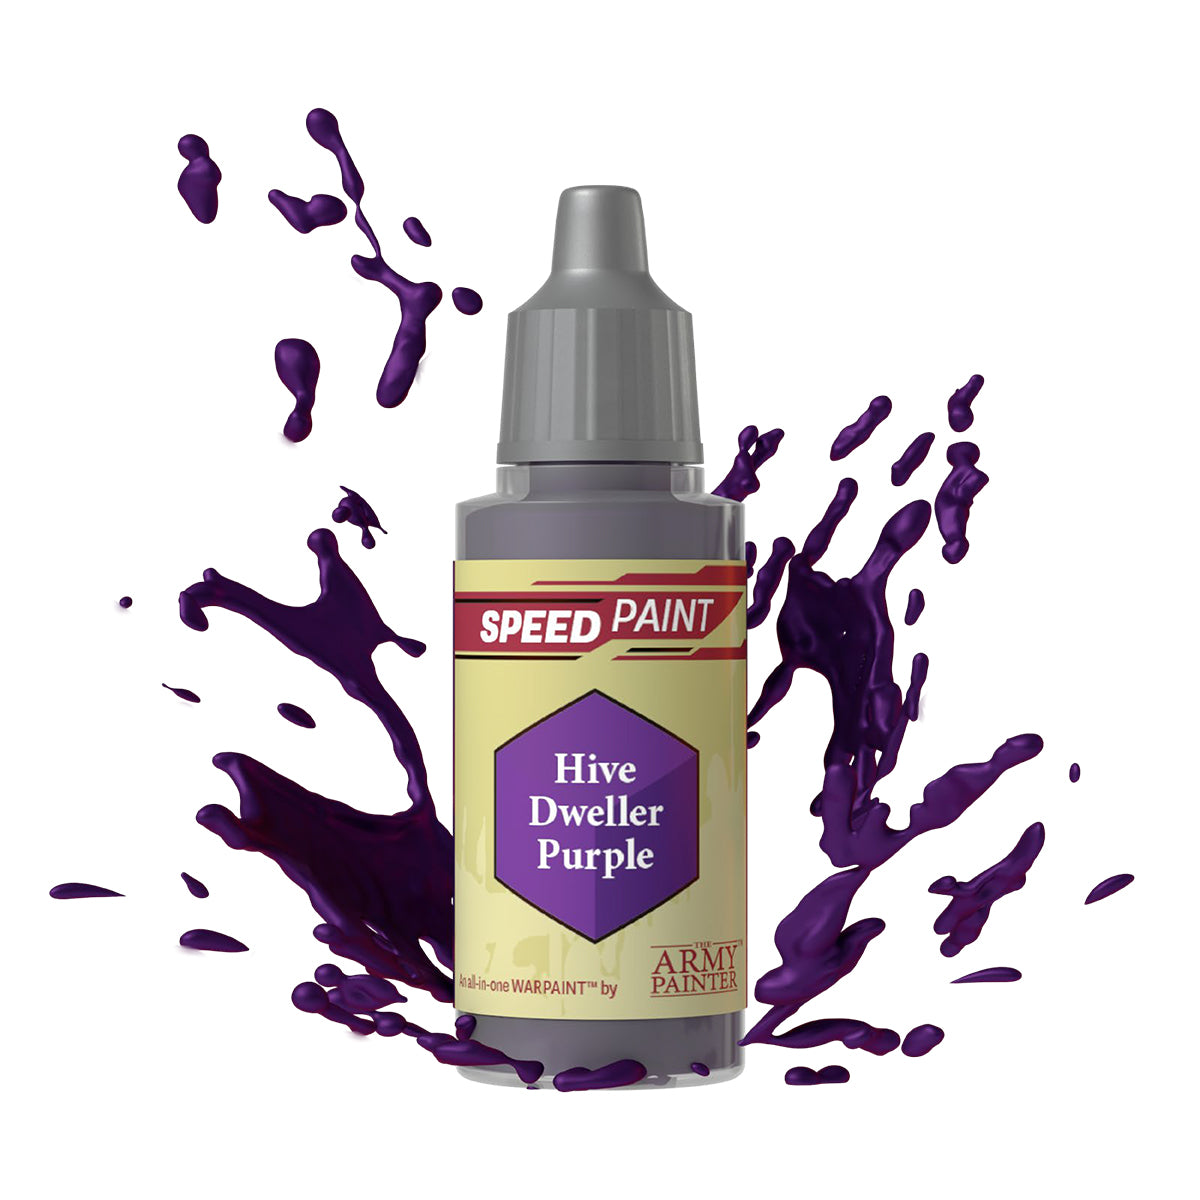 Hive Games - The Army Painter Primer Sprays